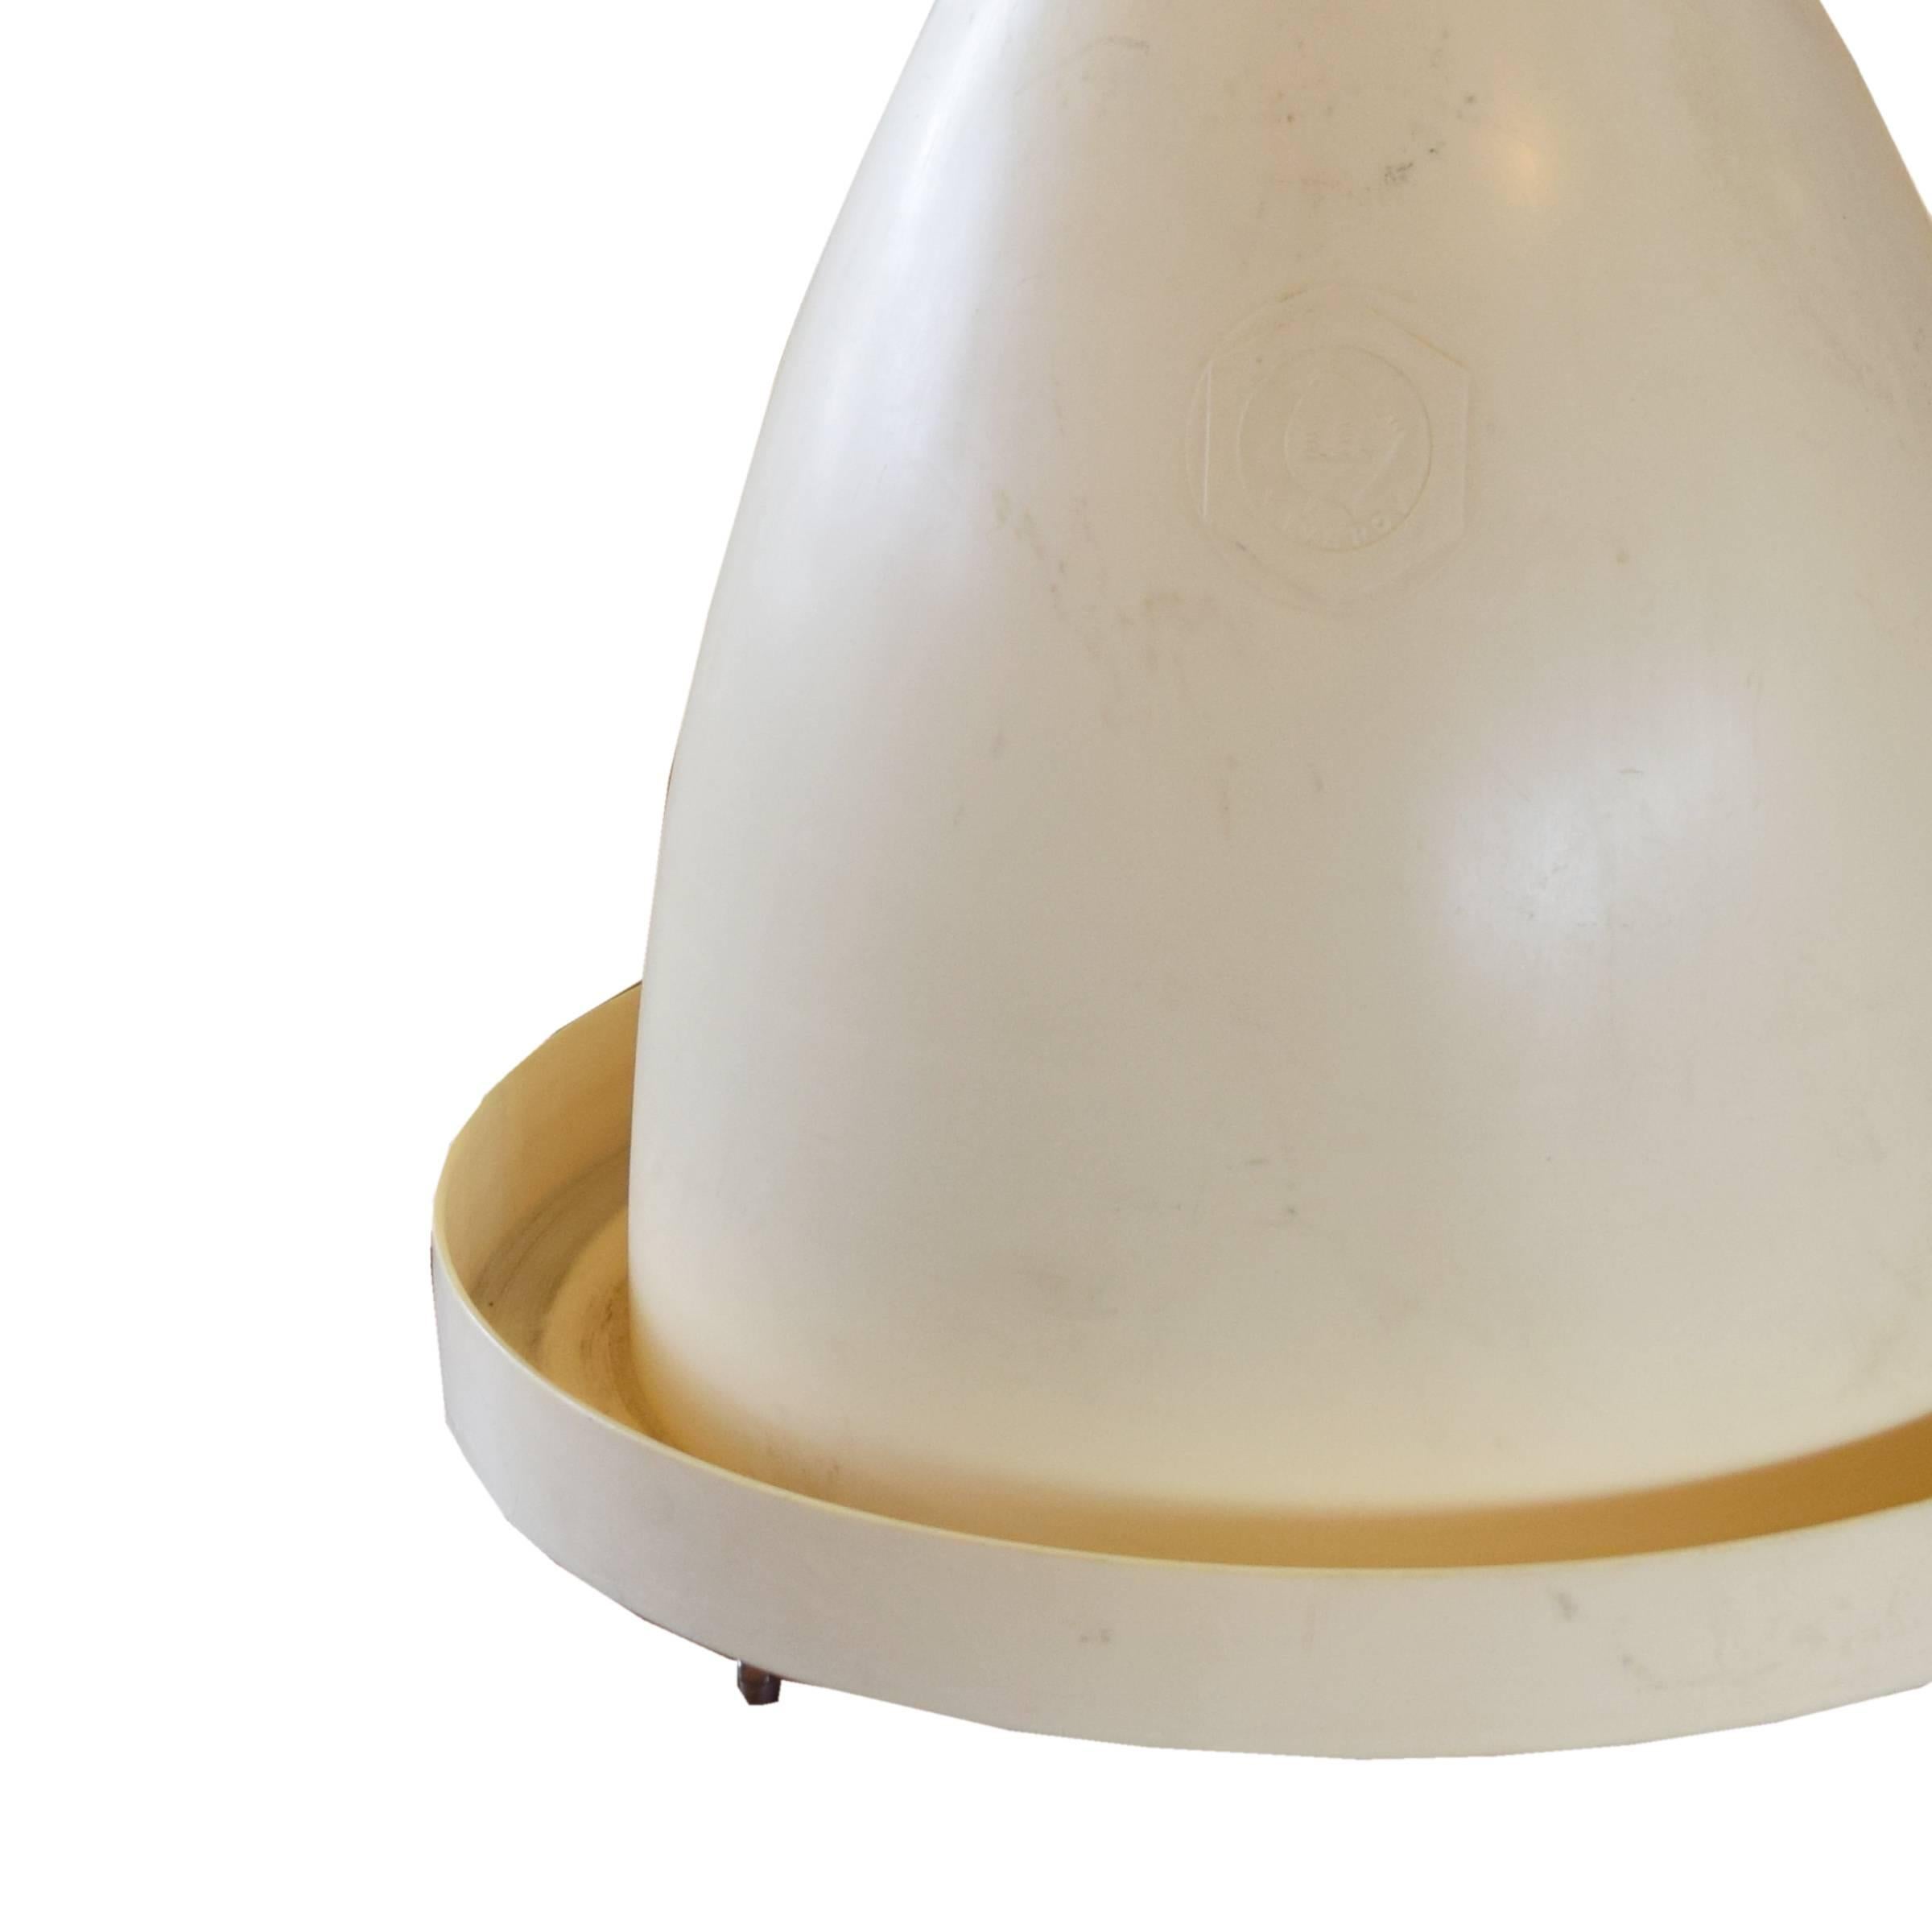 Midcentury Light Fixture In Excellent Condition For Sale In Chicago, IL